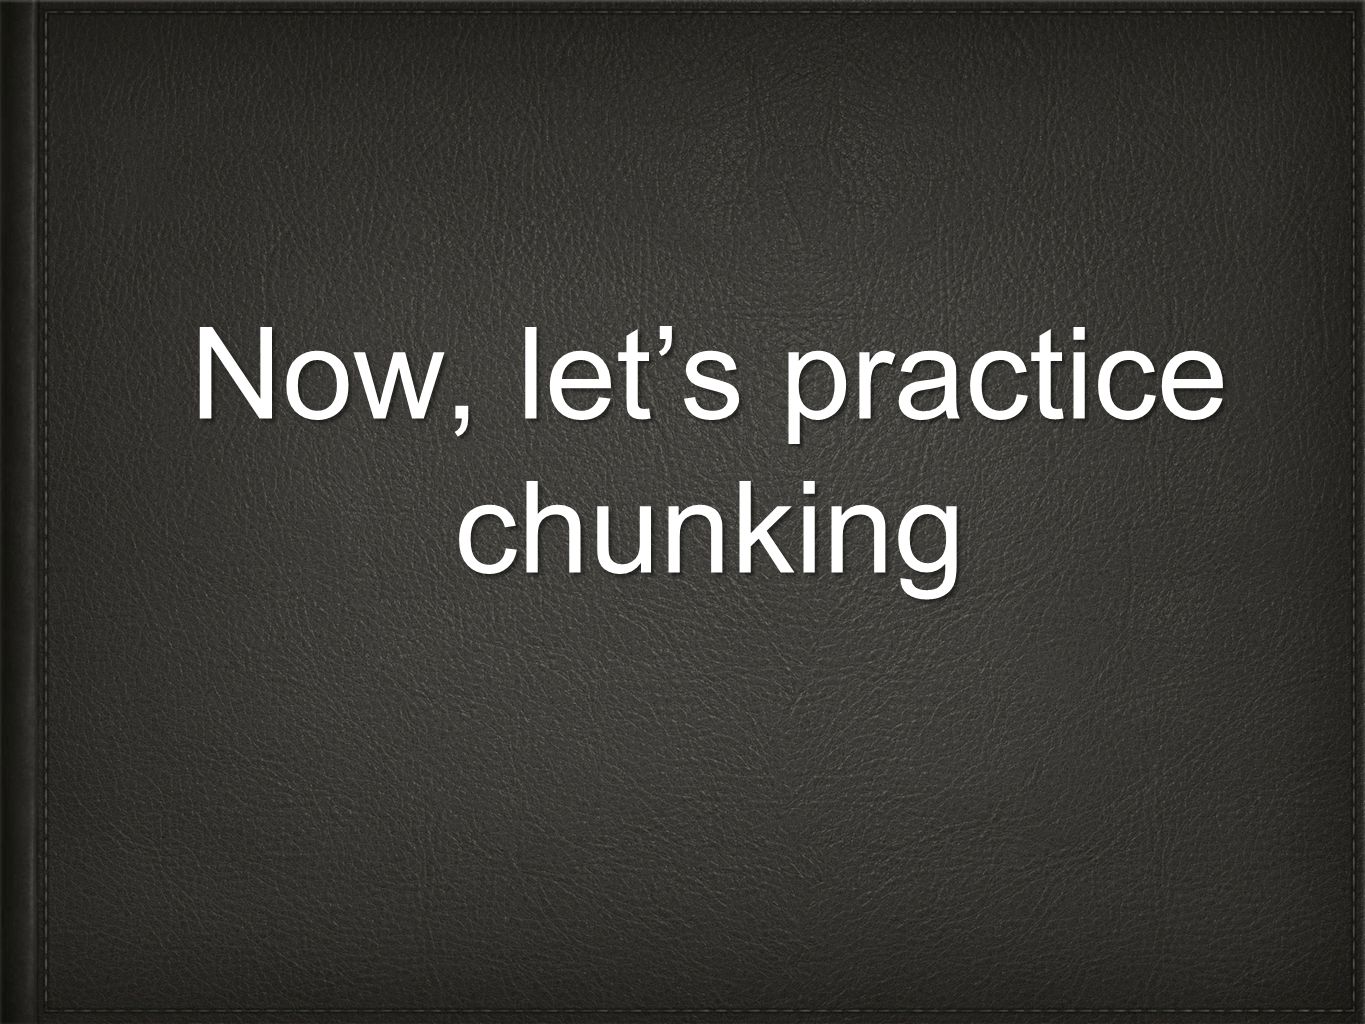 Now, let’s practice chunking